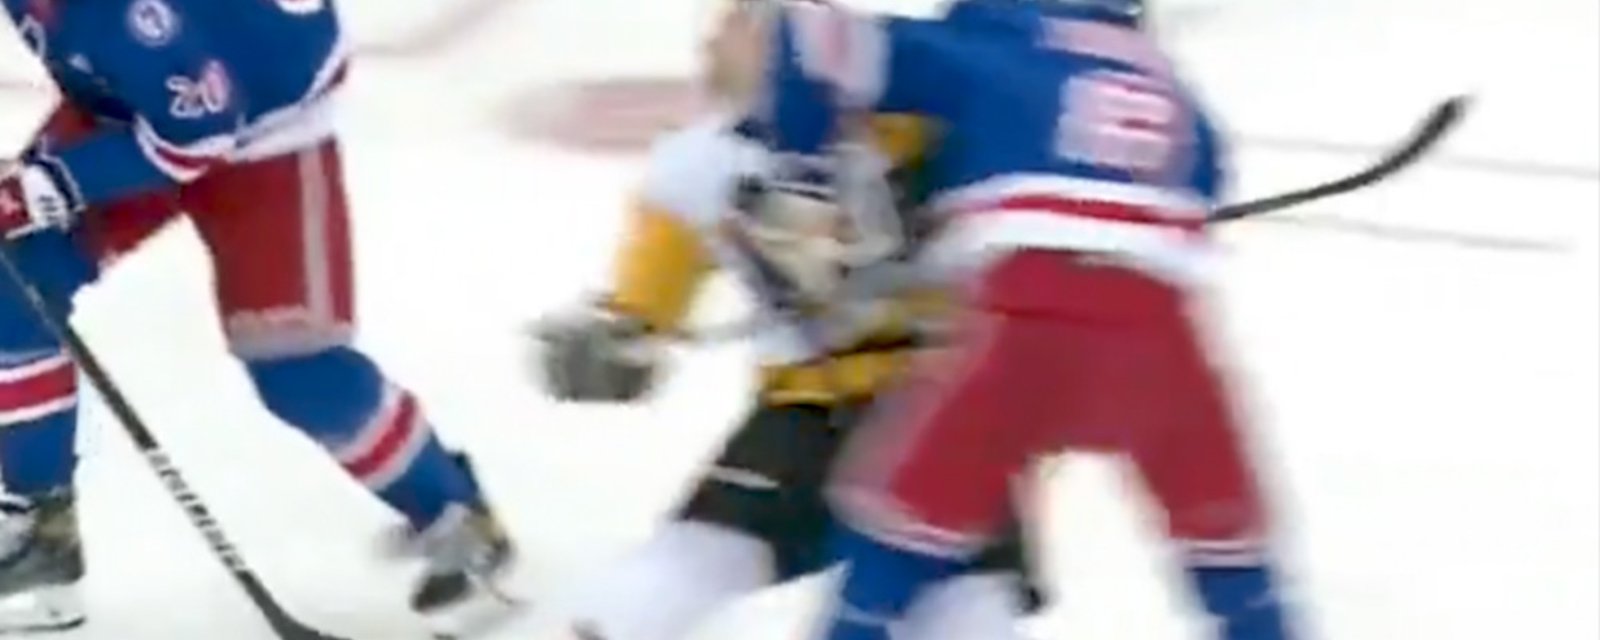 Rangers D Jacob Trouba sounds off on his injuring of Penguins C Sidney Crosby! 